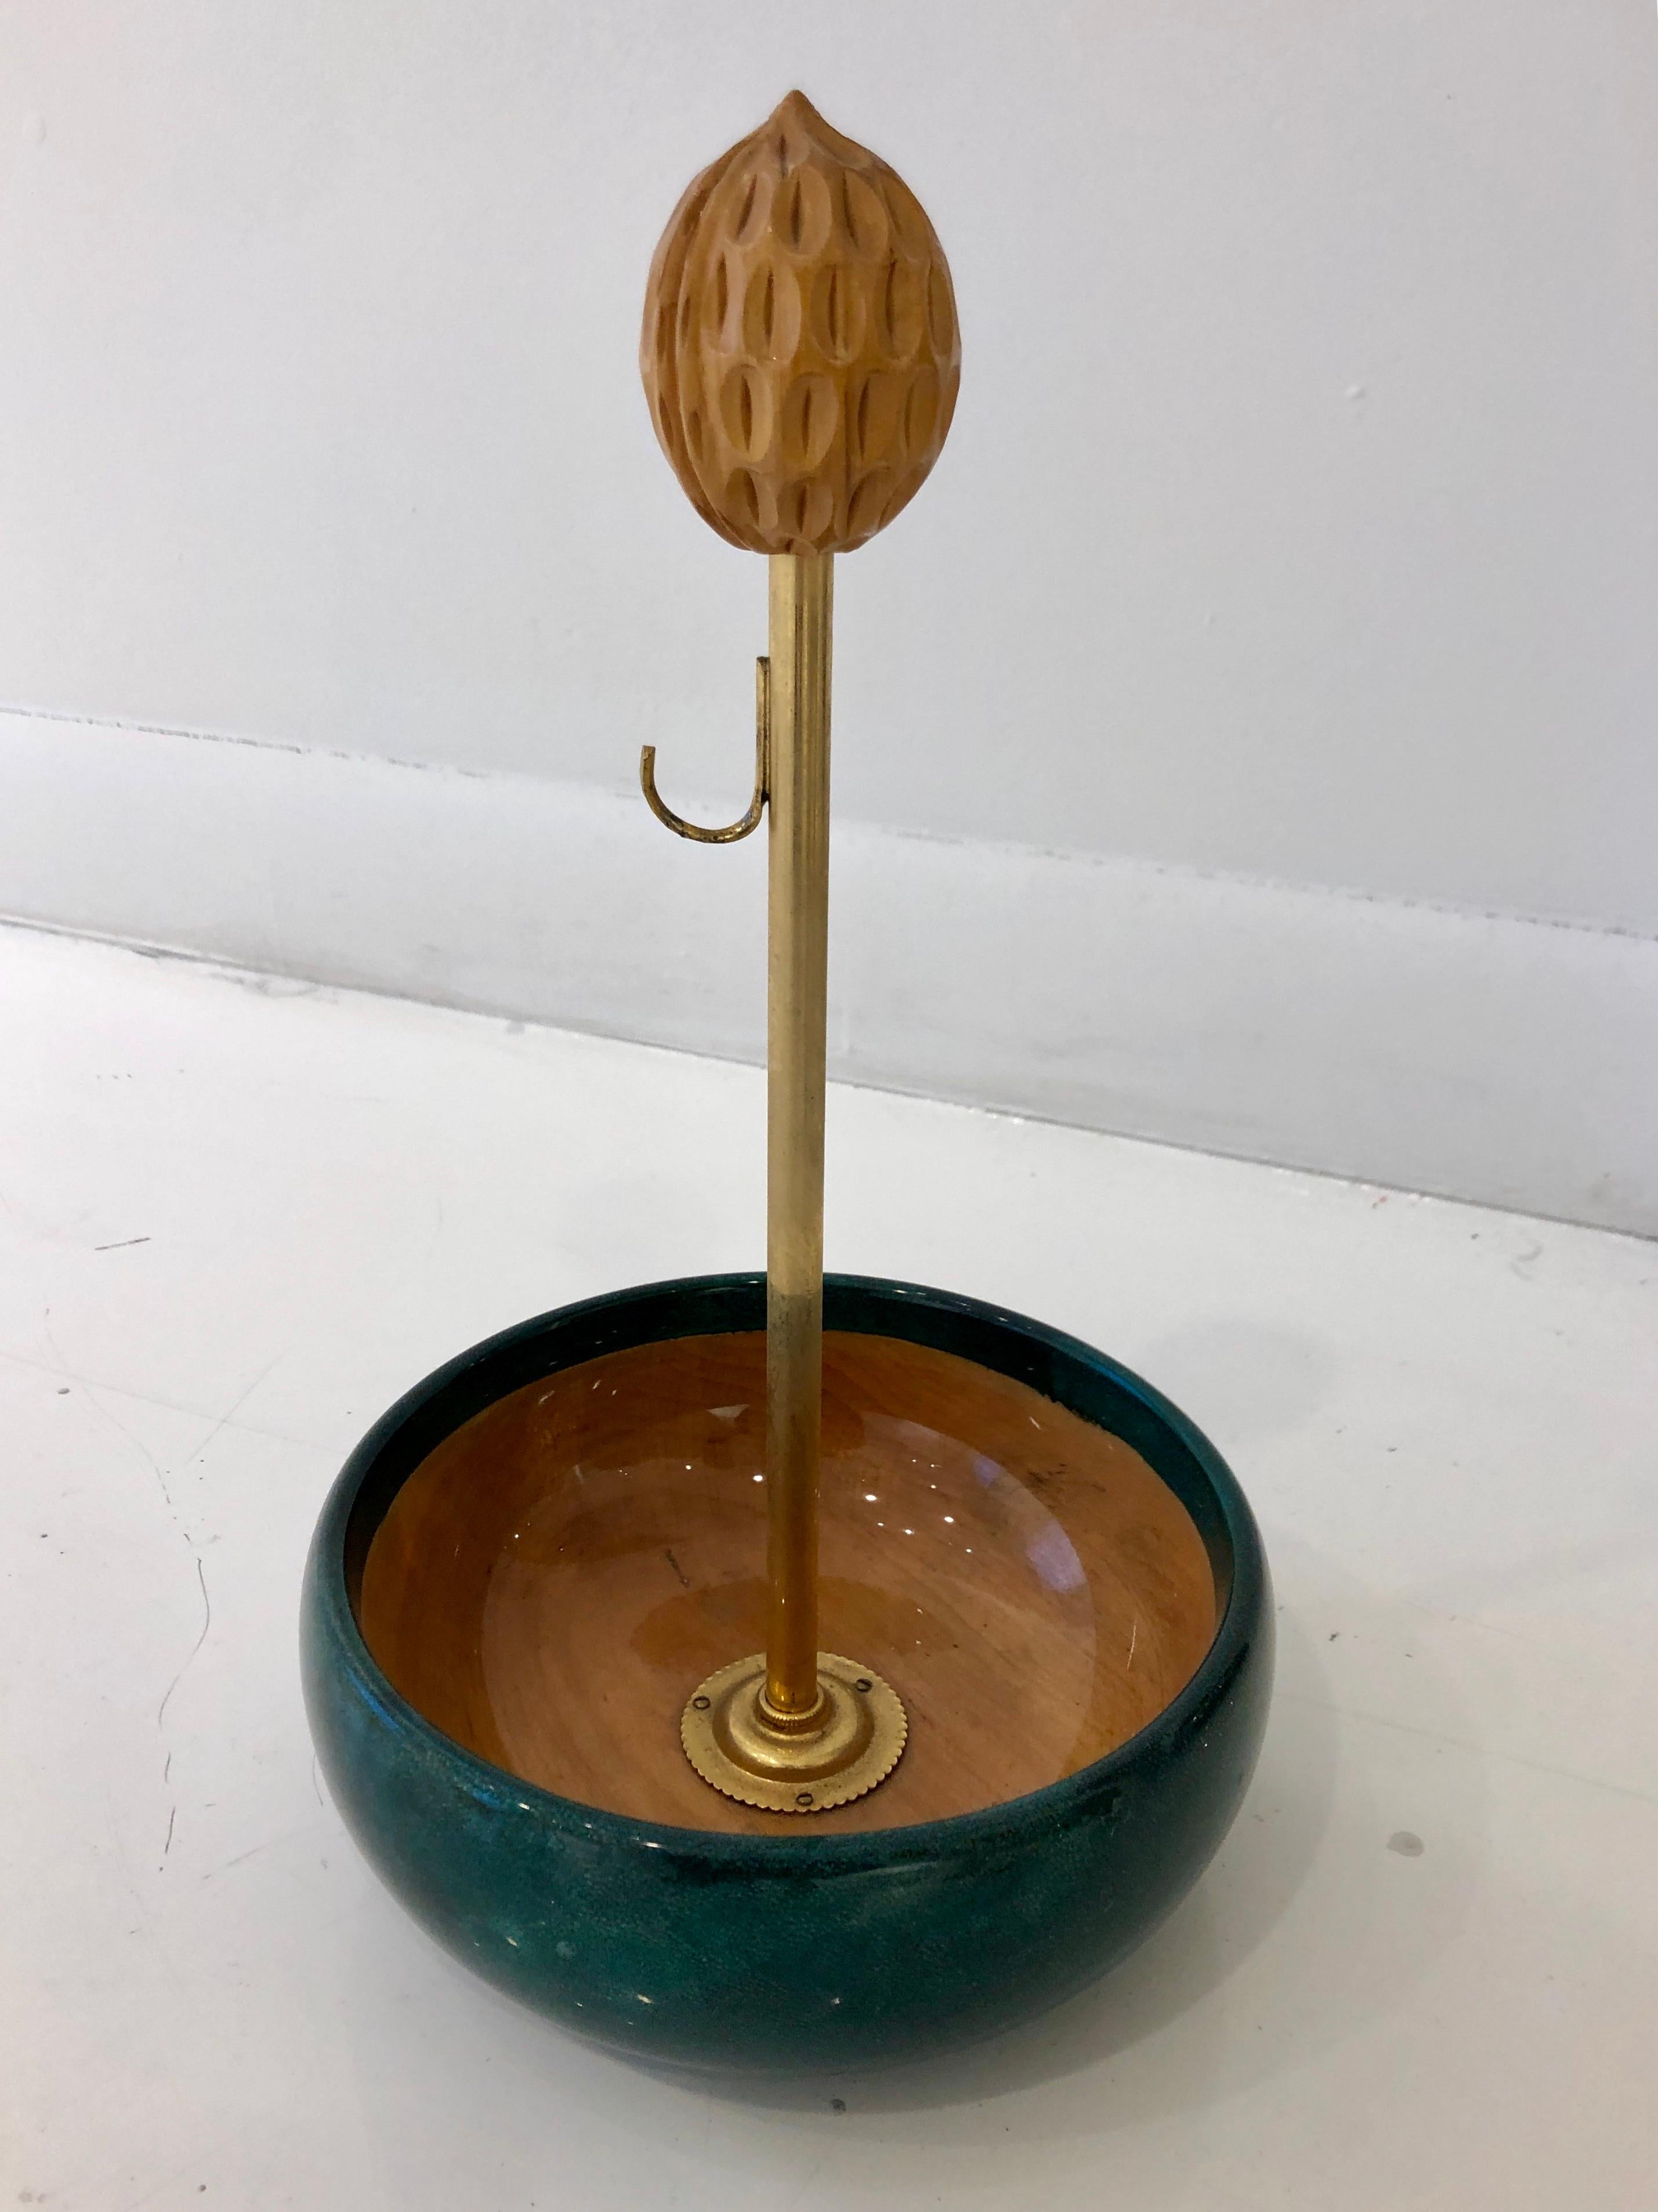 Whimsical nut bowl as sculpture. Green velum wrapped mahogany bowl with 24-karat gold gilded brass stem and nutcracker with carved walnut finial.